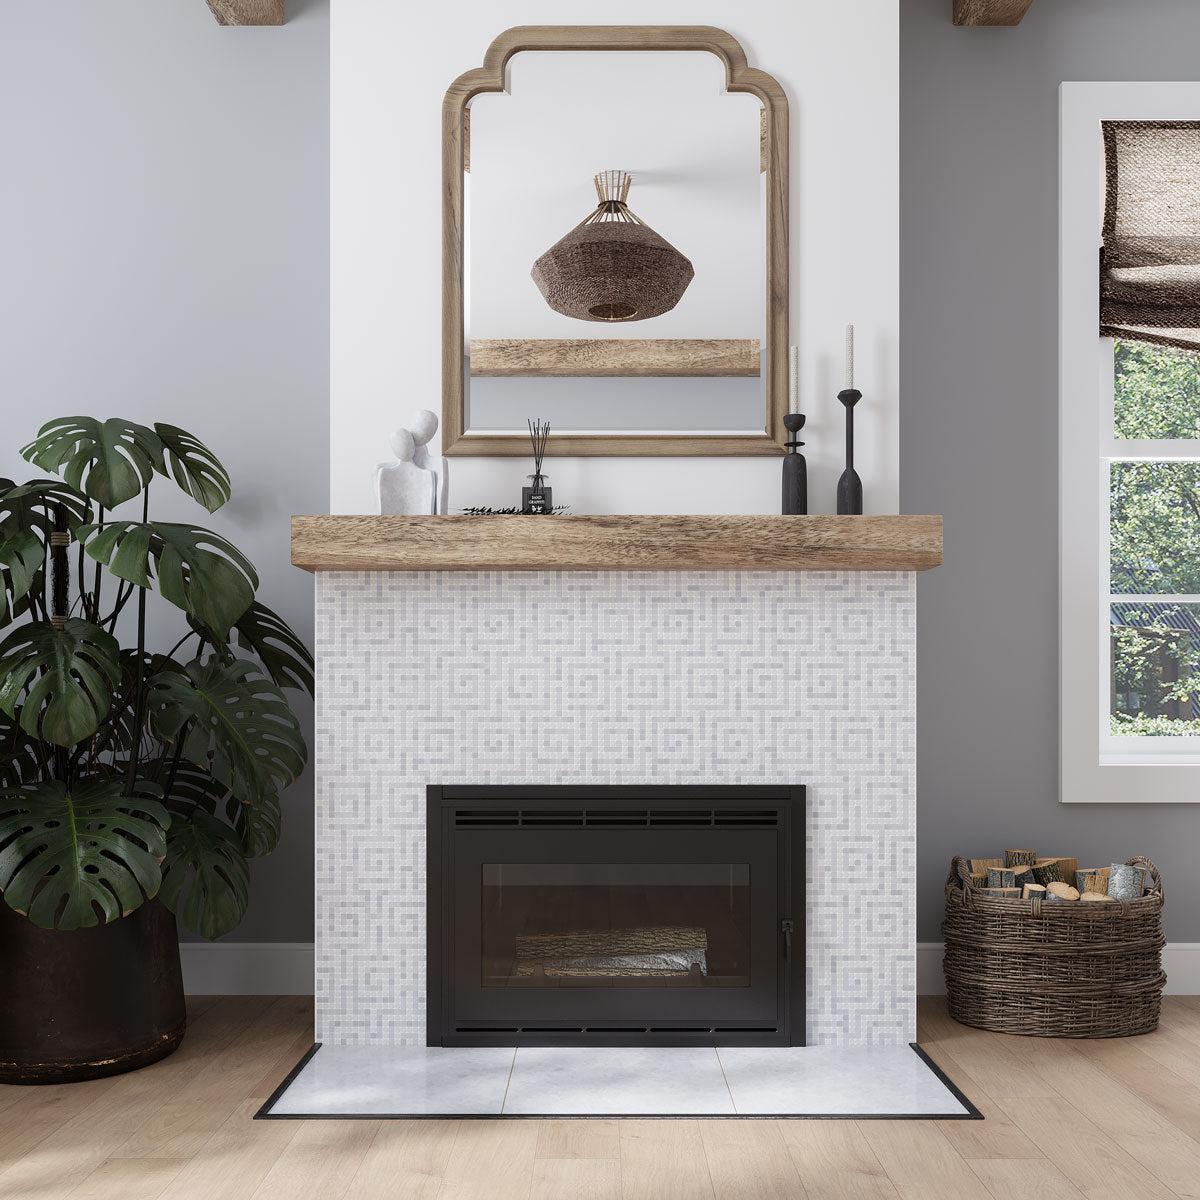 California Casual living room with a Greek key mosaic fireplace tile surround and wood mantel